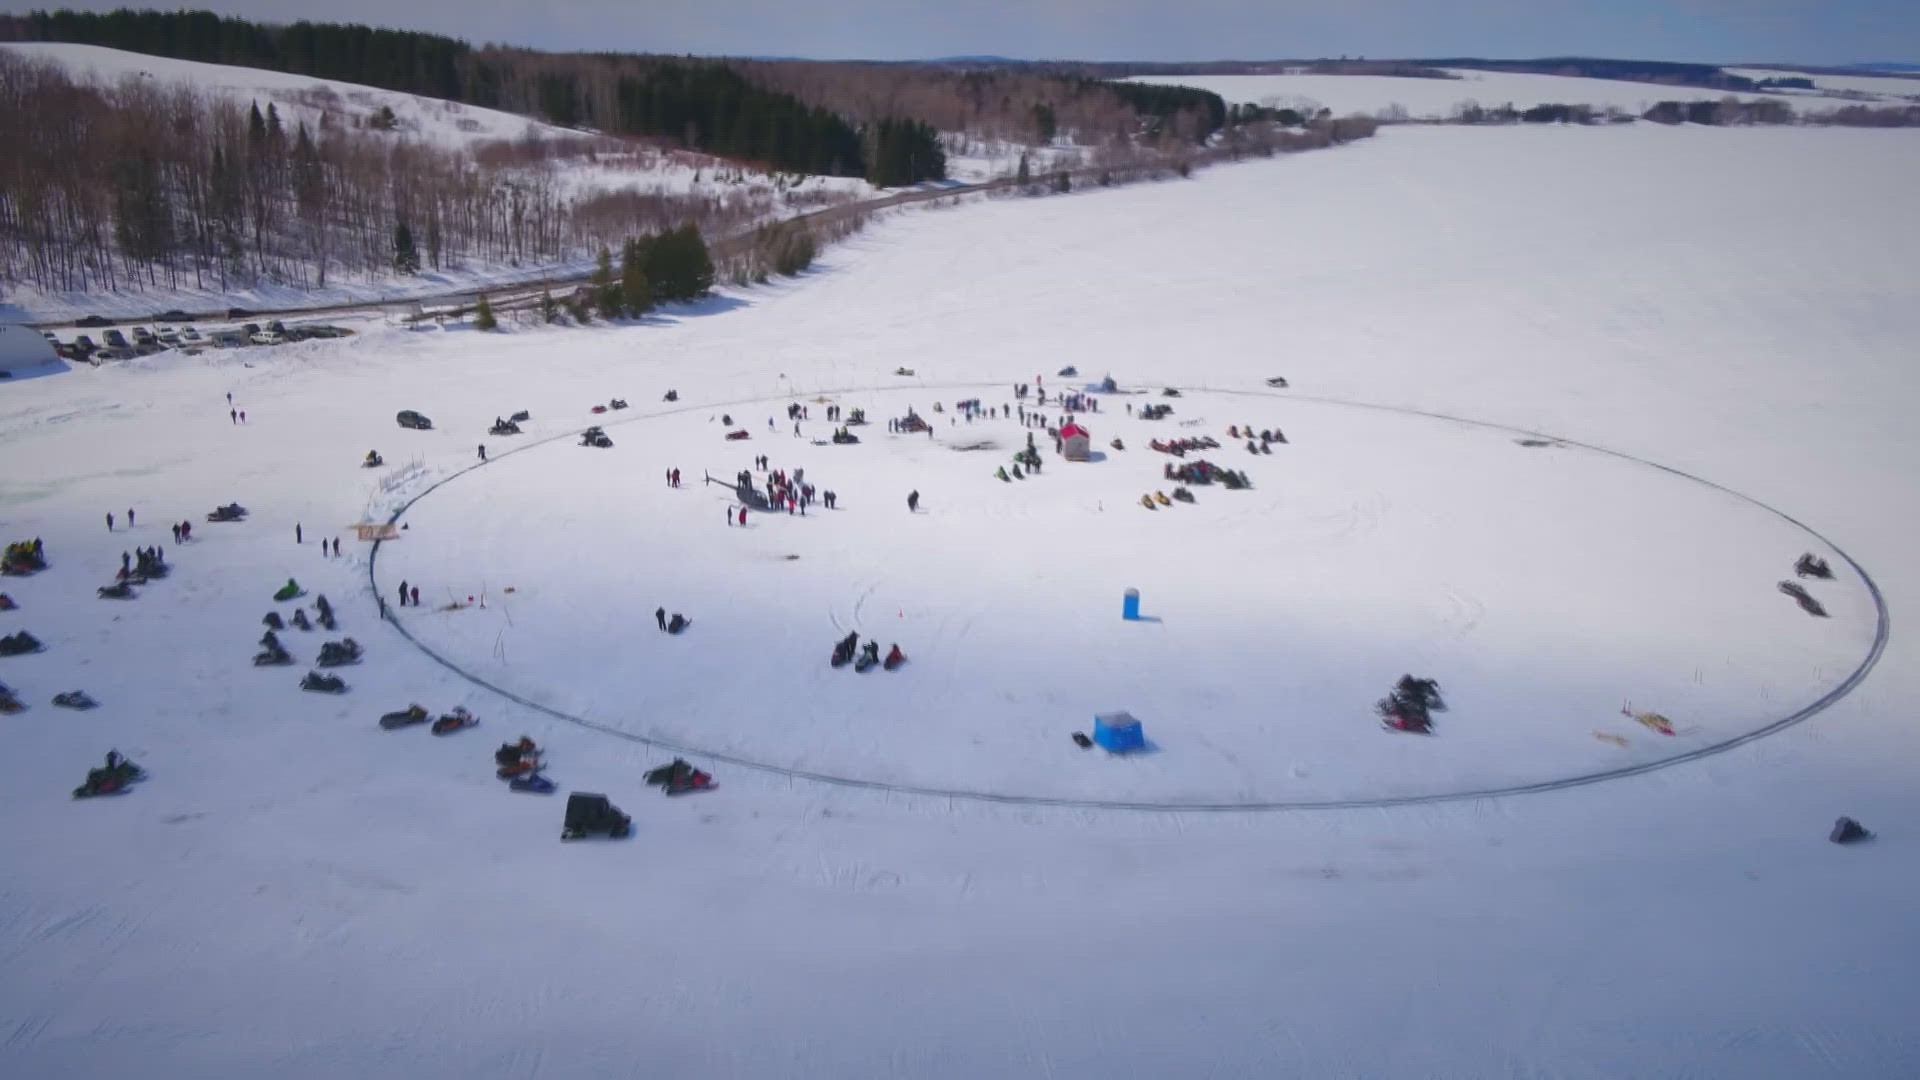 The Northern Maine Ice Busters are looking to make history this weekend by creating the world's largest ice carousel.